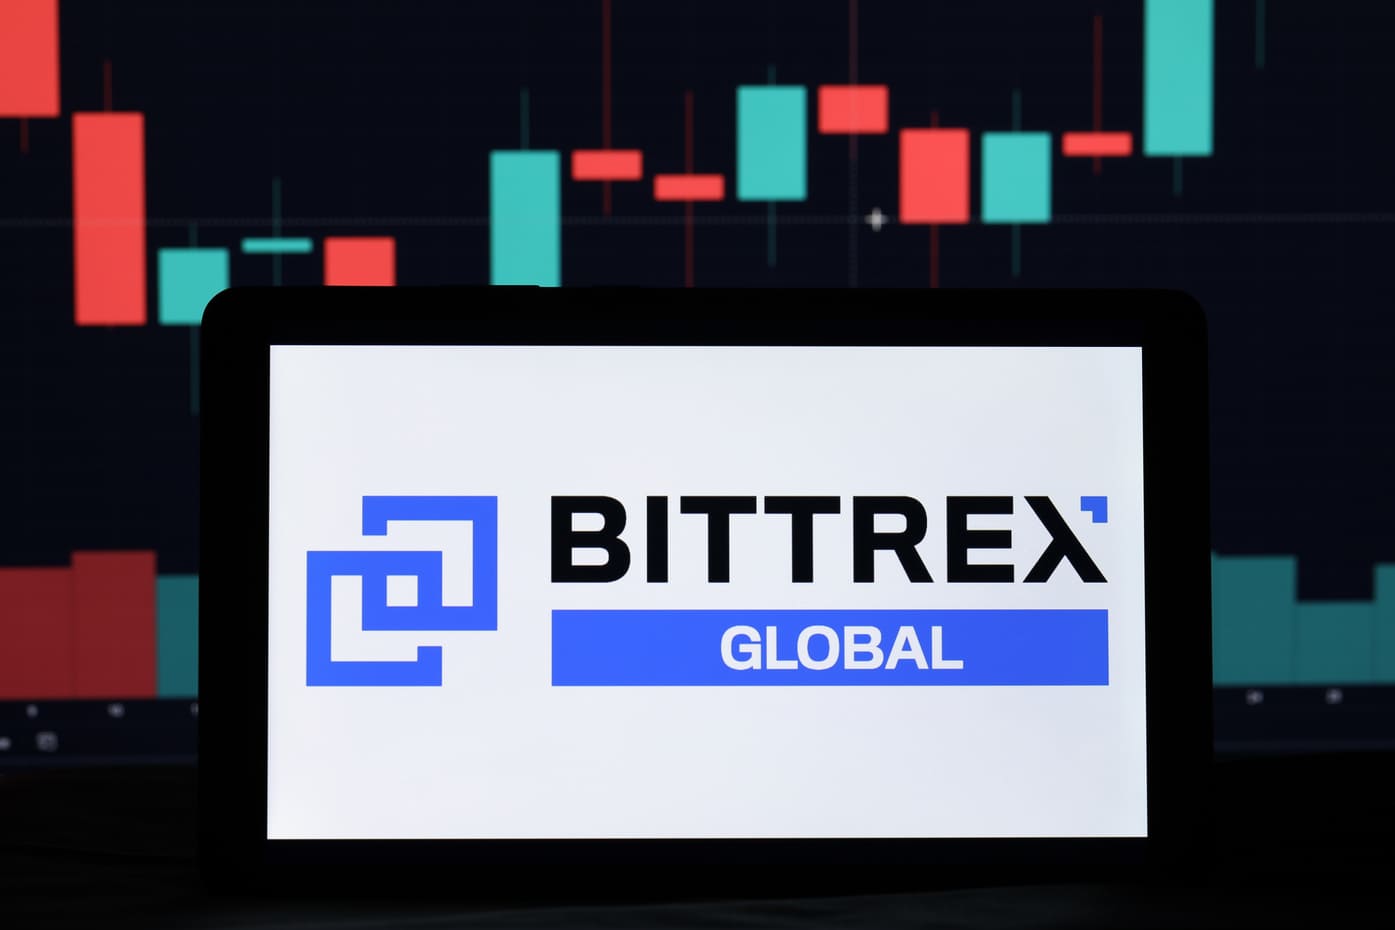 SEC Charges Bittrex and Former CEO for Operating Unregistered Securities Exchange